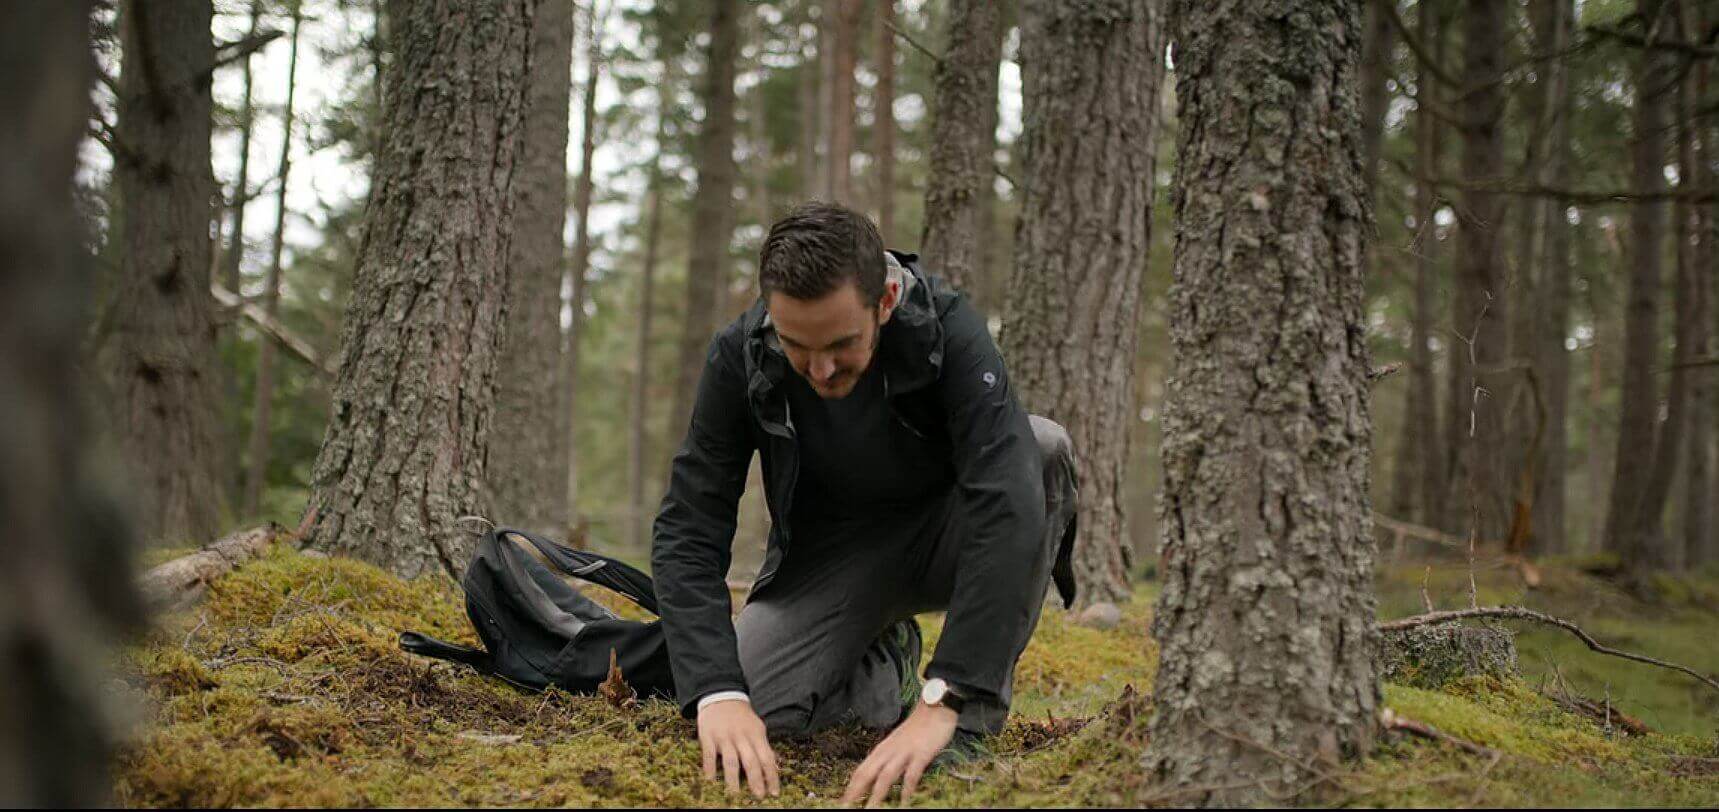 Our lab's Tom Crowther in Netflix' Alien Worlds, looking for mycelial networks below ground!